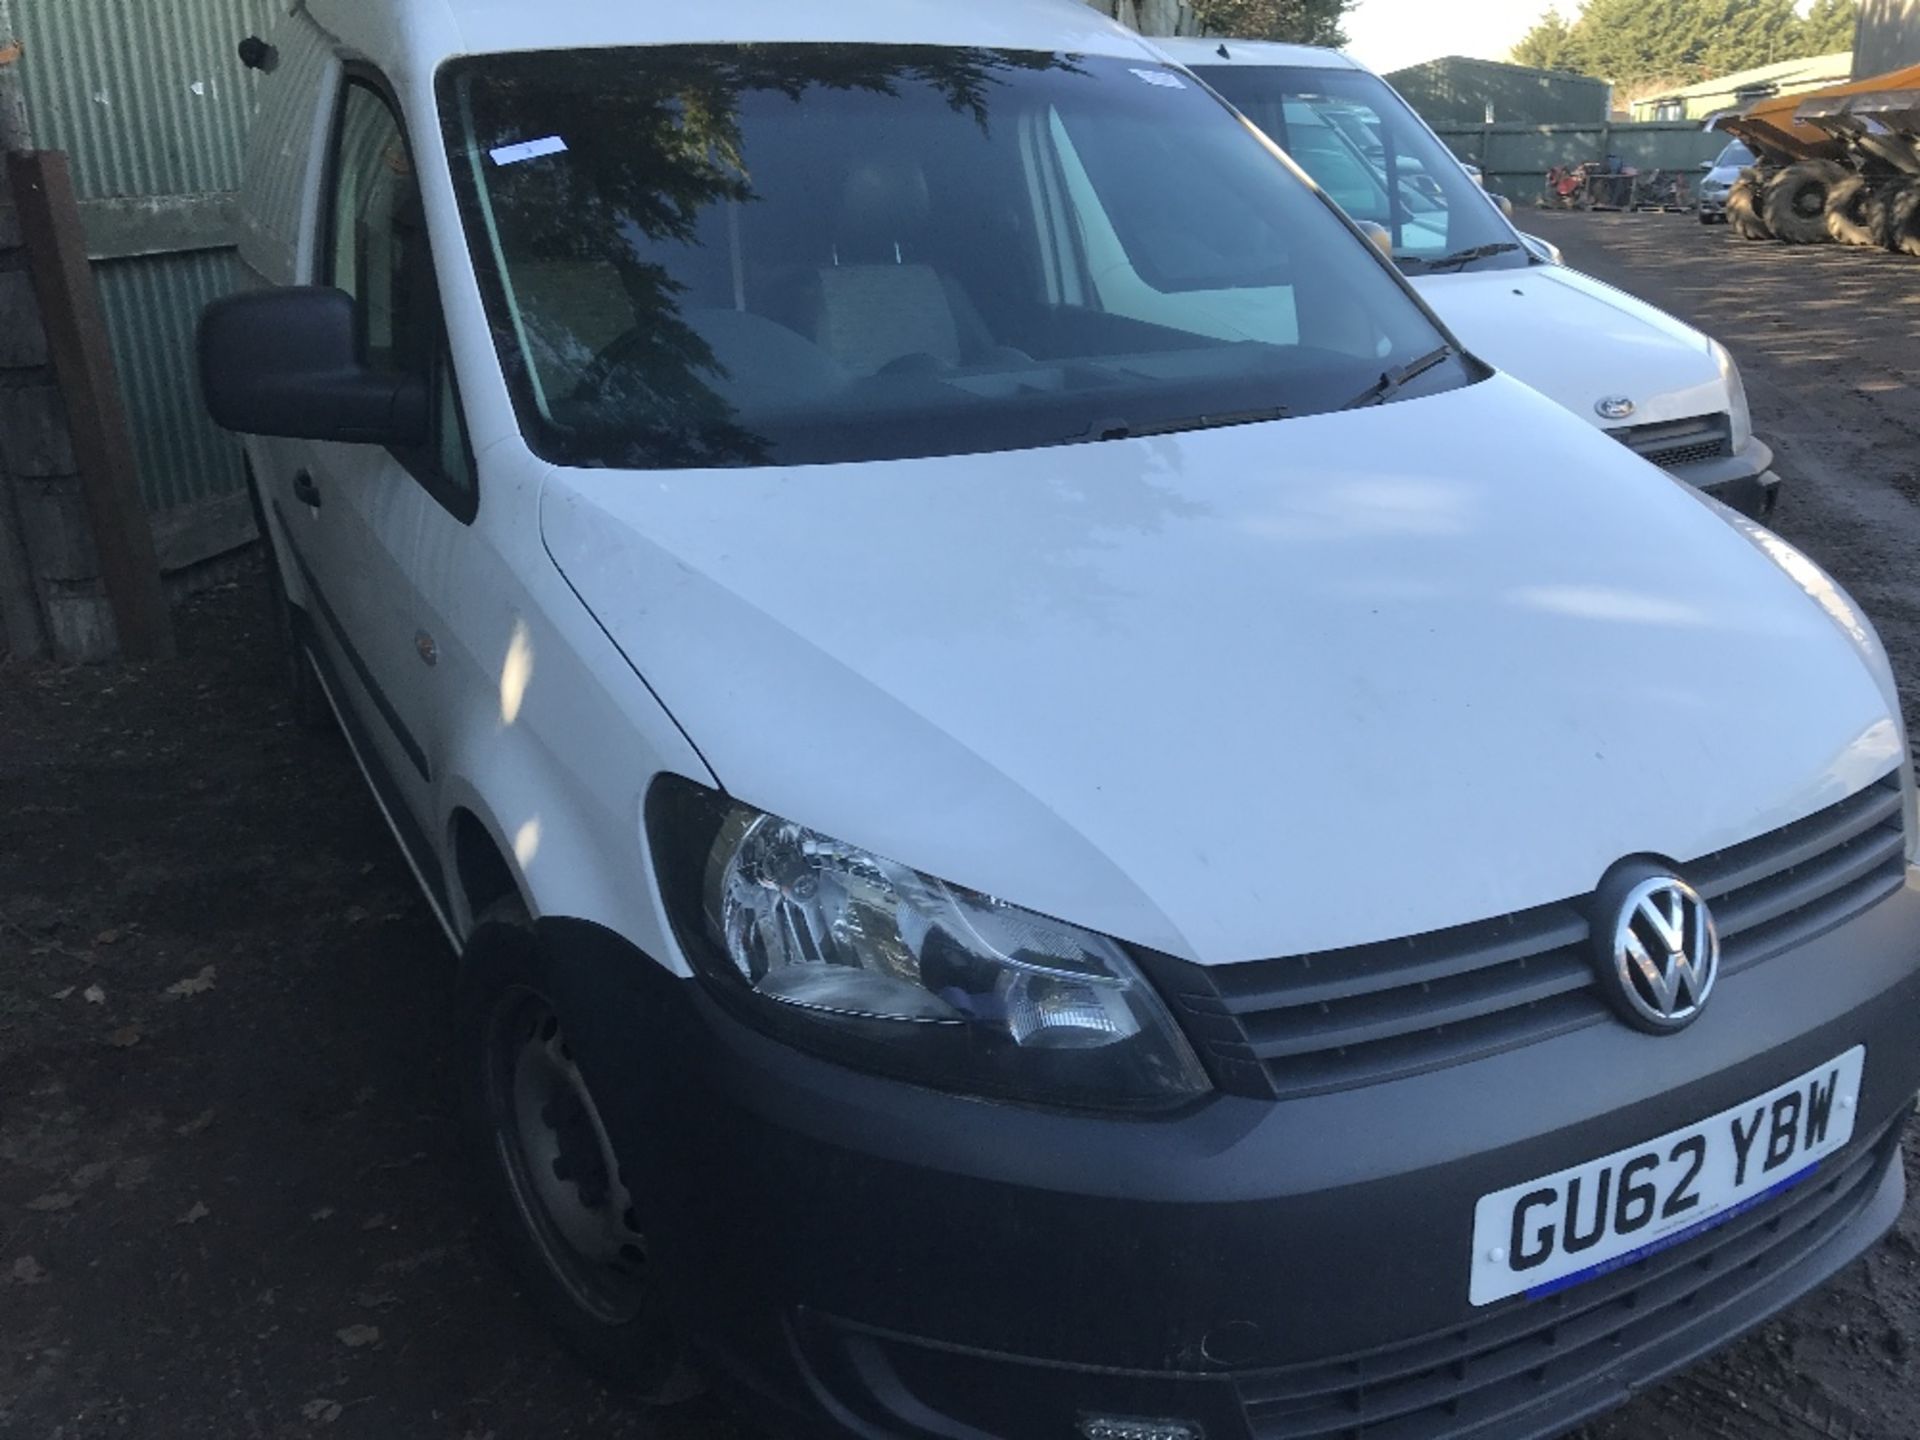 VOLKSWAGEN CADDY PANEL VAN, MULTI CAMERA SYSTEM REG:GU62 YBW WHEN TESTED WAS SEEN TO RUN, DRIVE, - Image 6 of 9